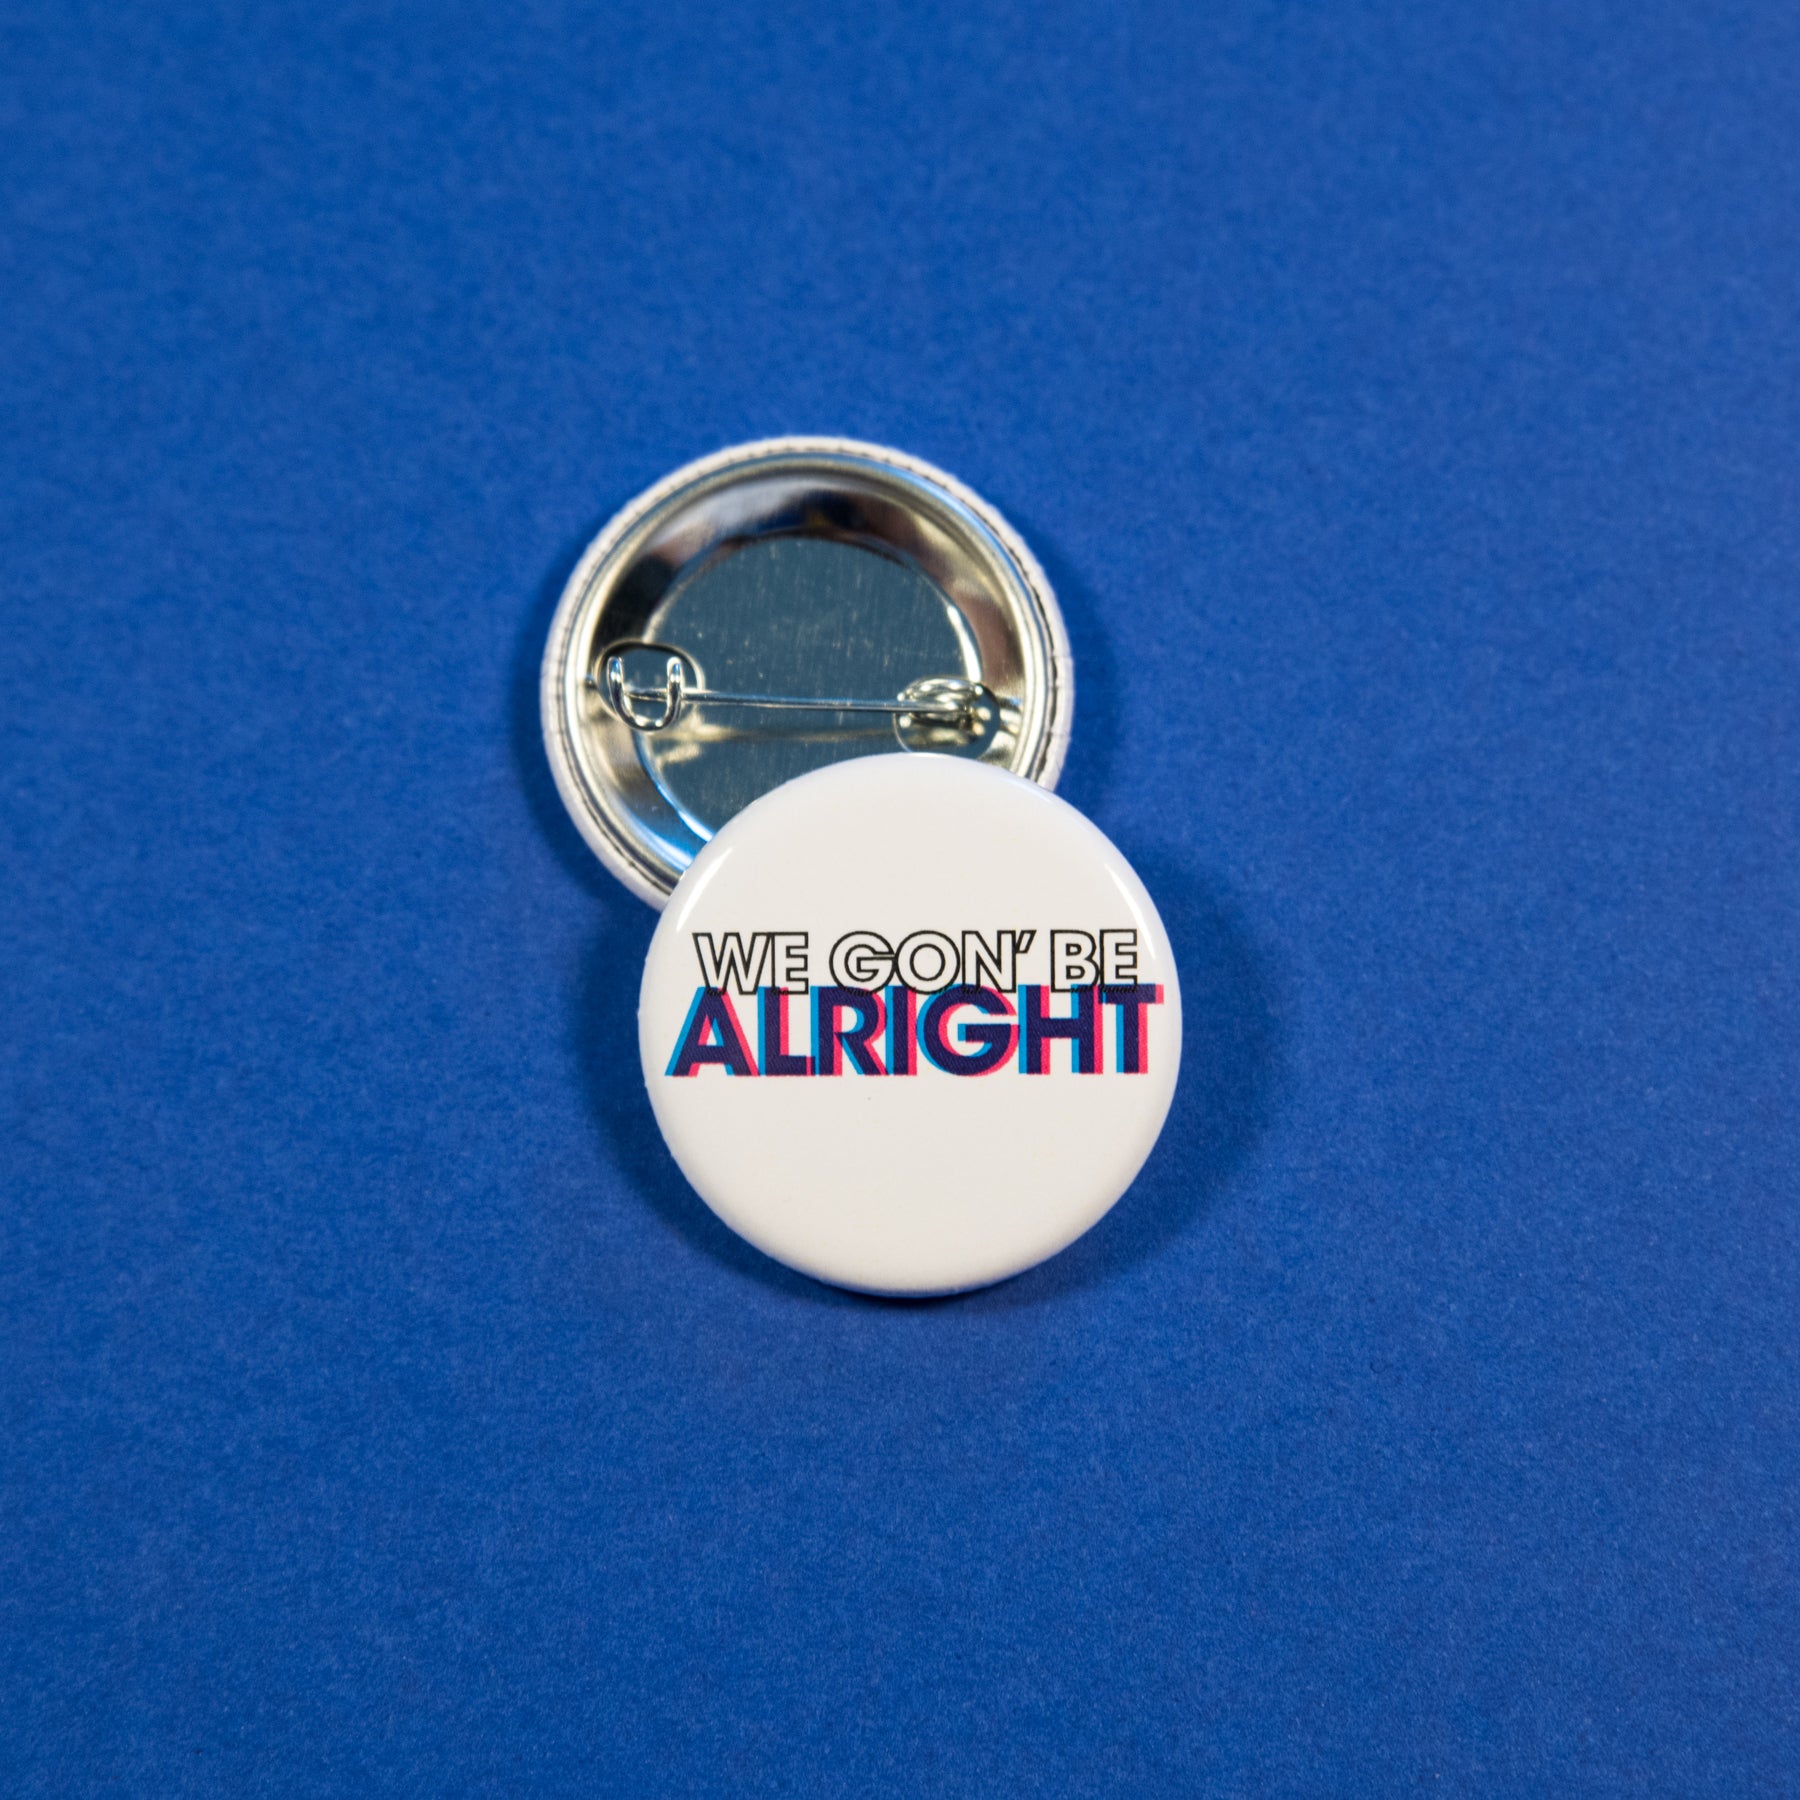 We Gon' Be Alright Button